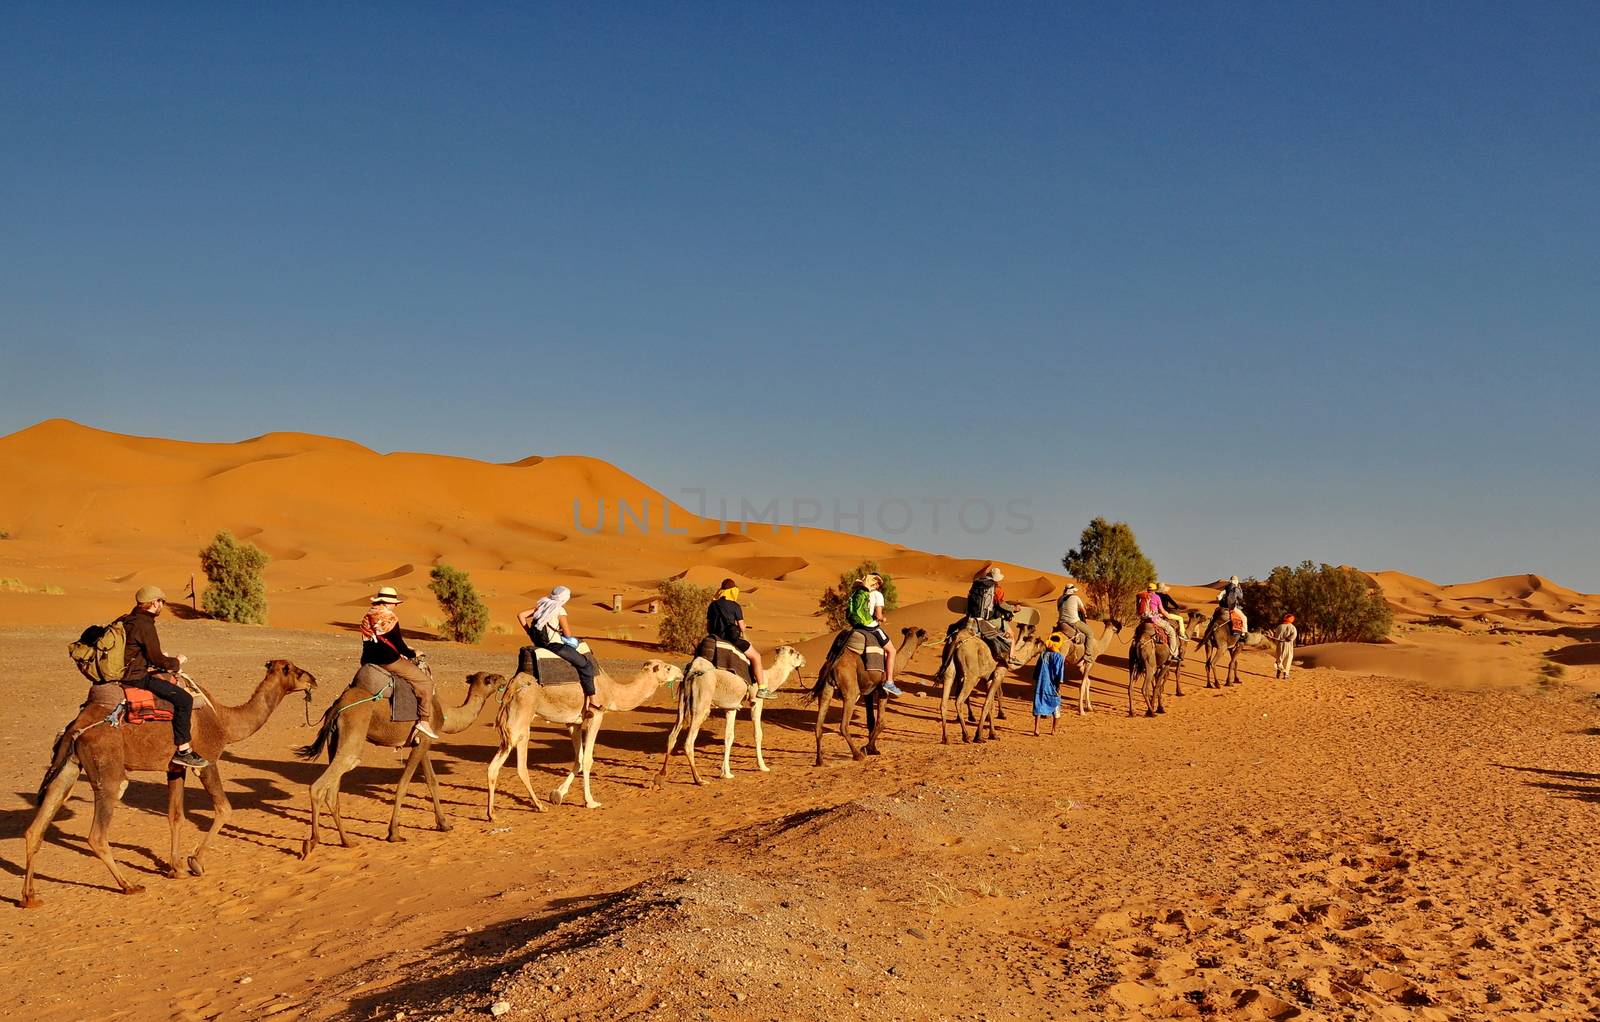 MERZOUGA DESERT - OCTOBER 01: Tourists in a Camel caravan in Mer by anderm